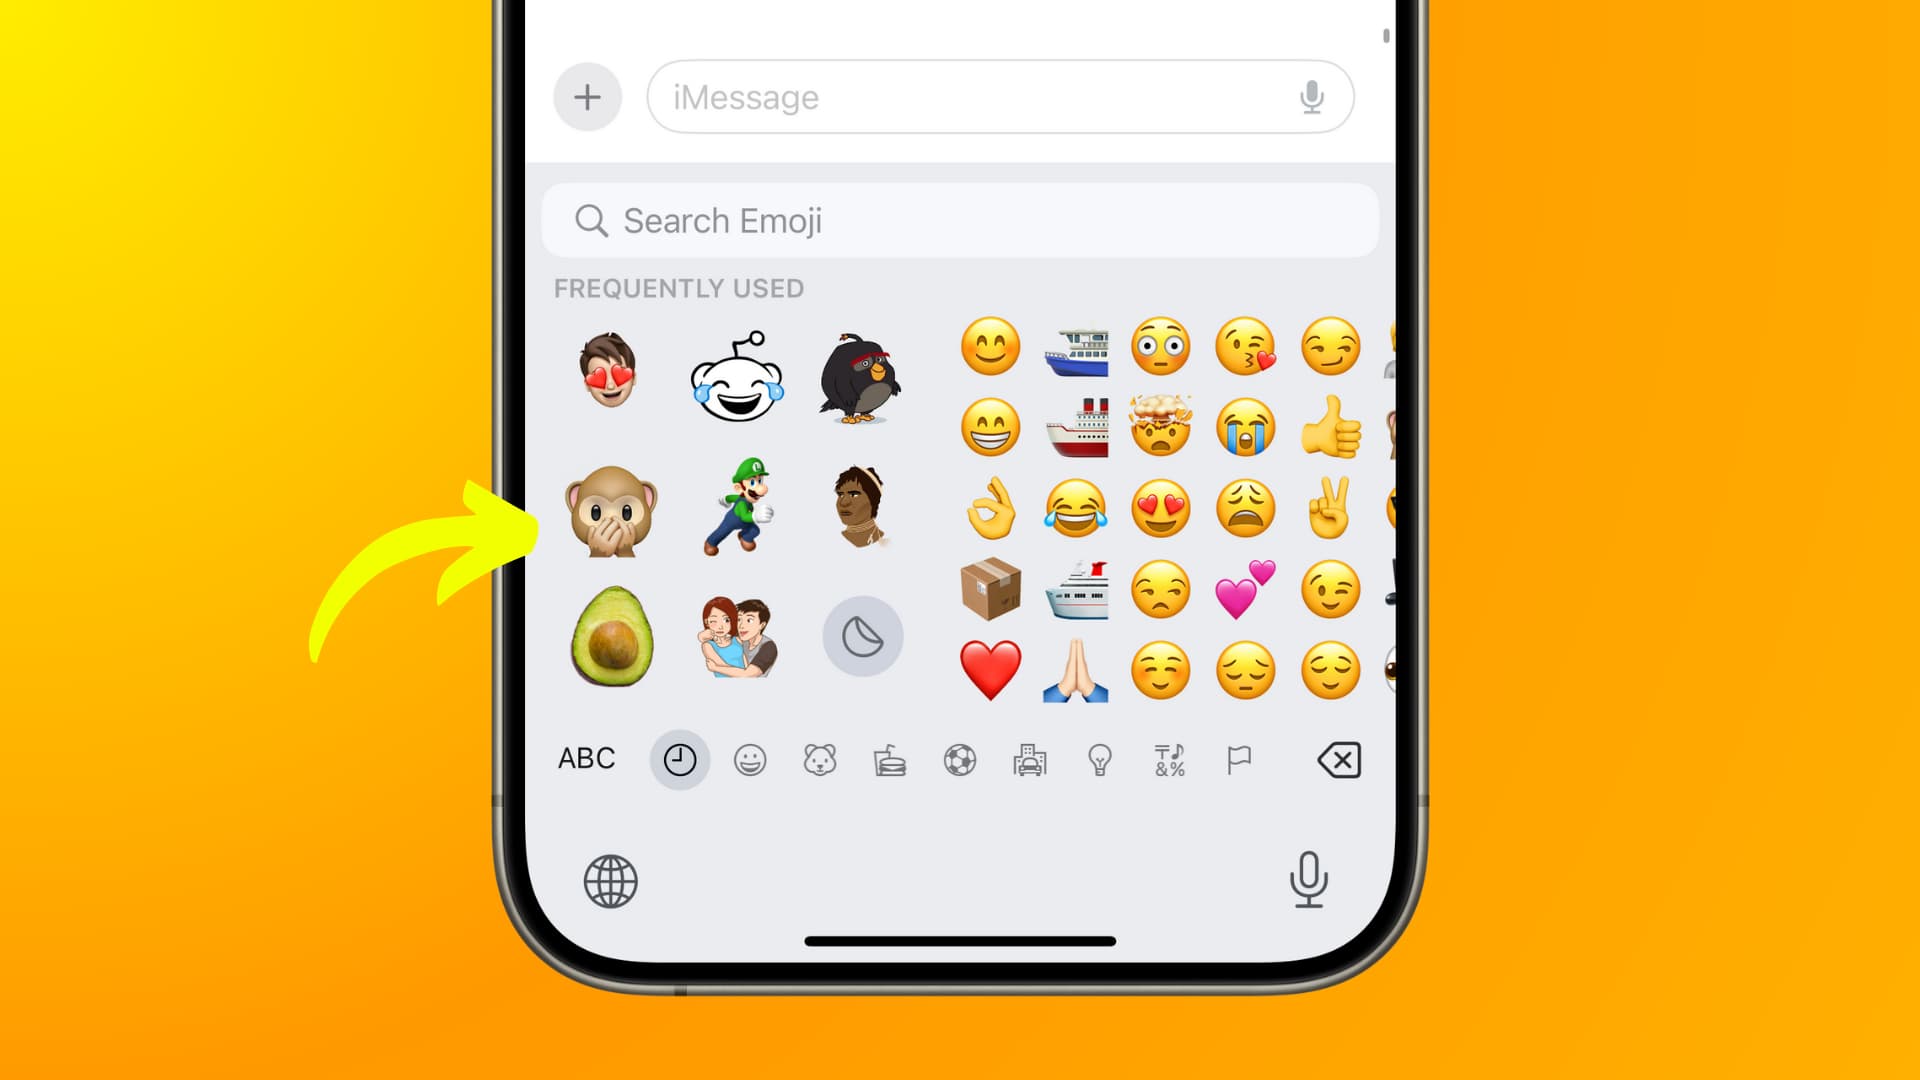 Stickers removed from iOS Keyboard